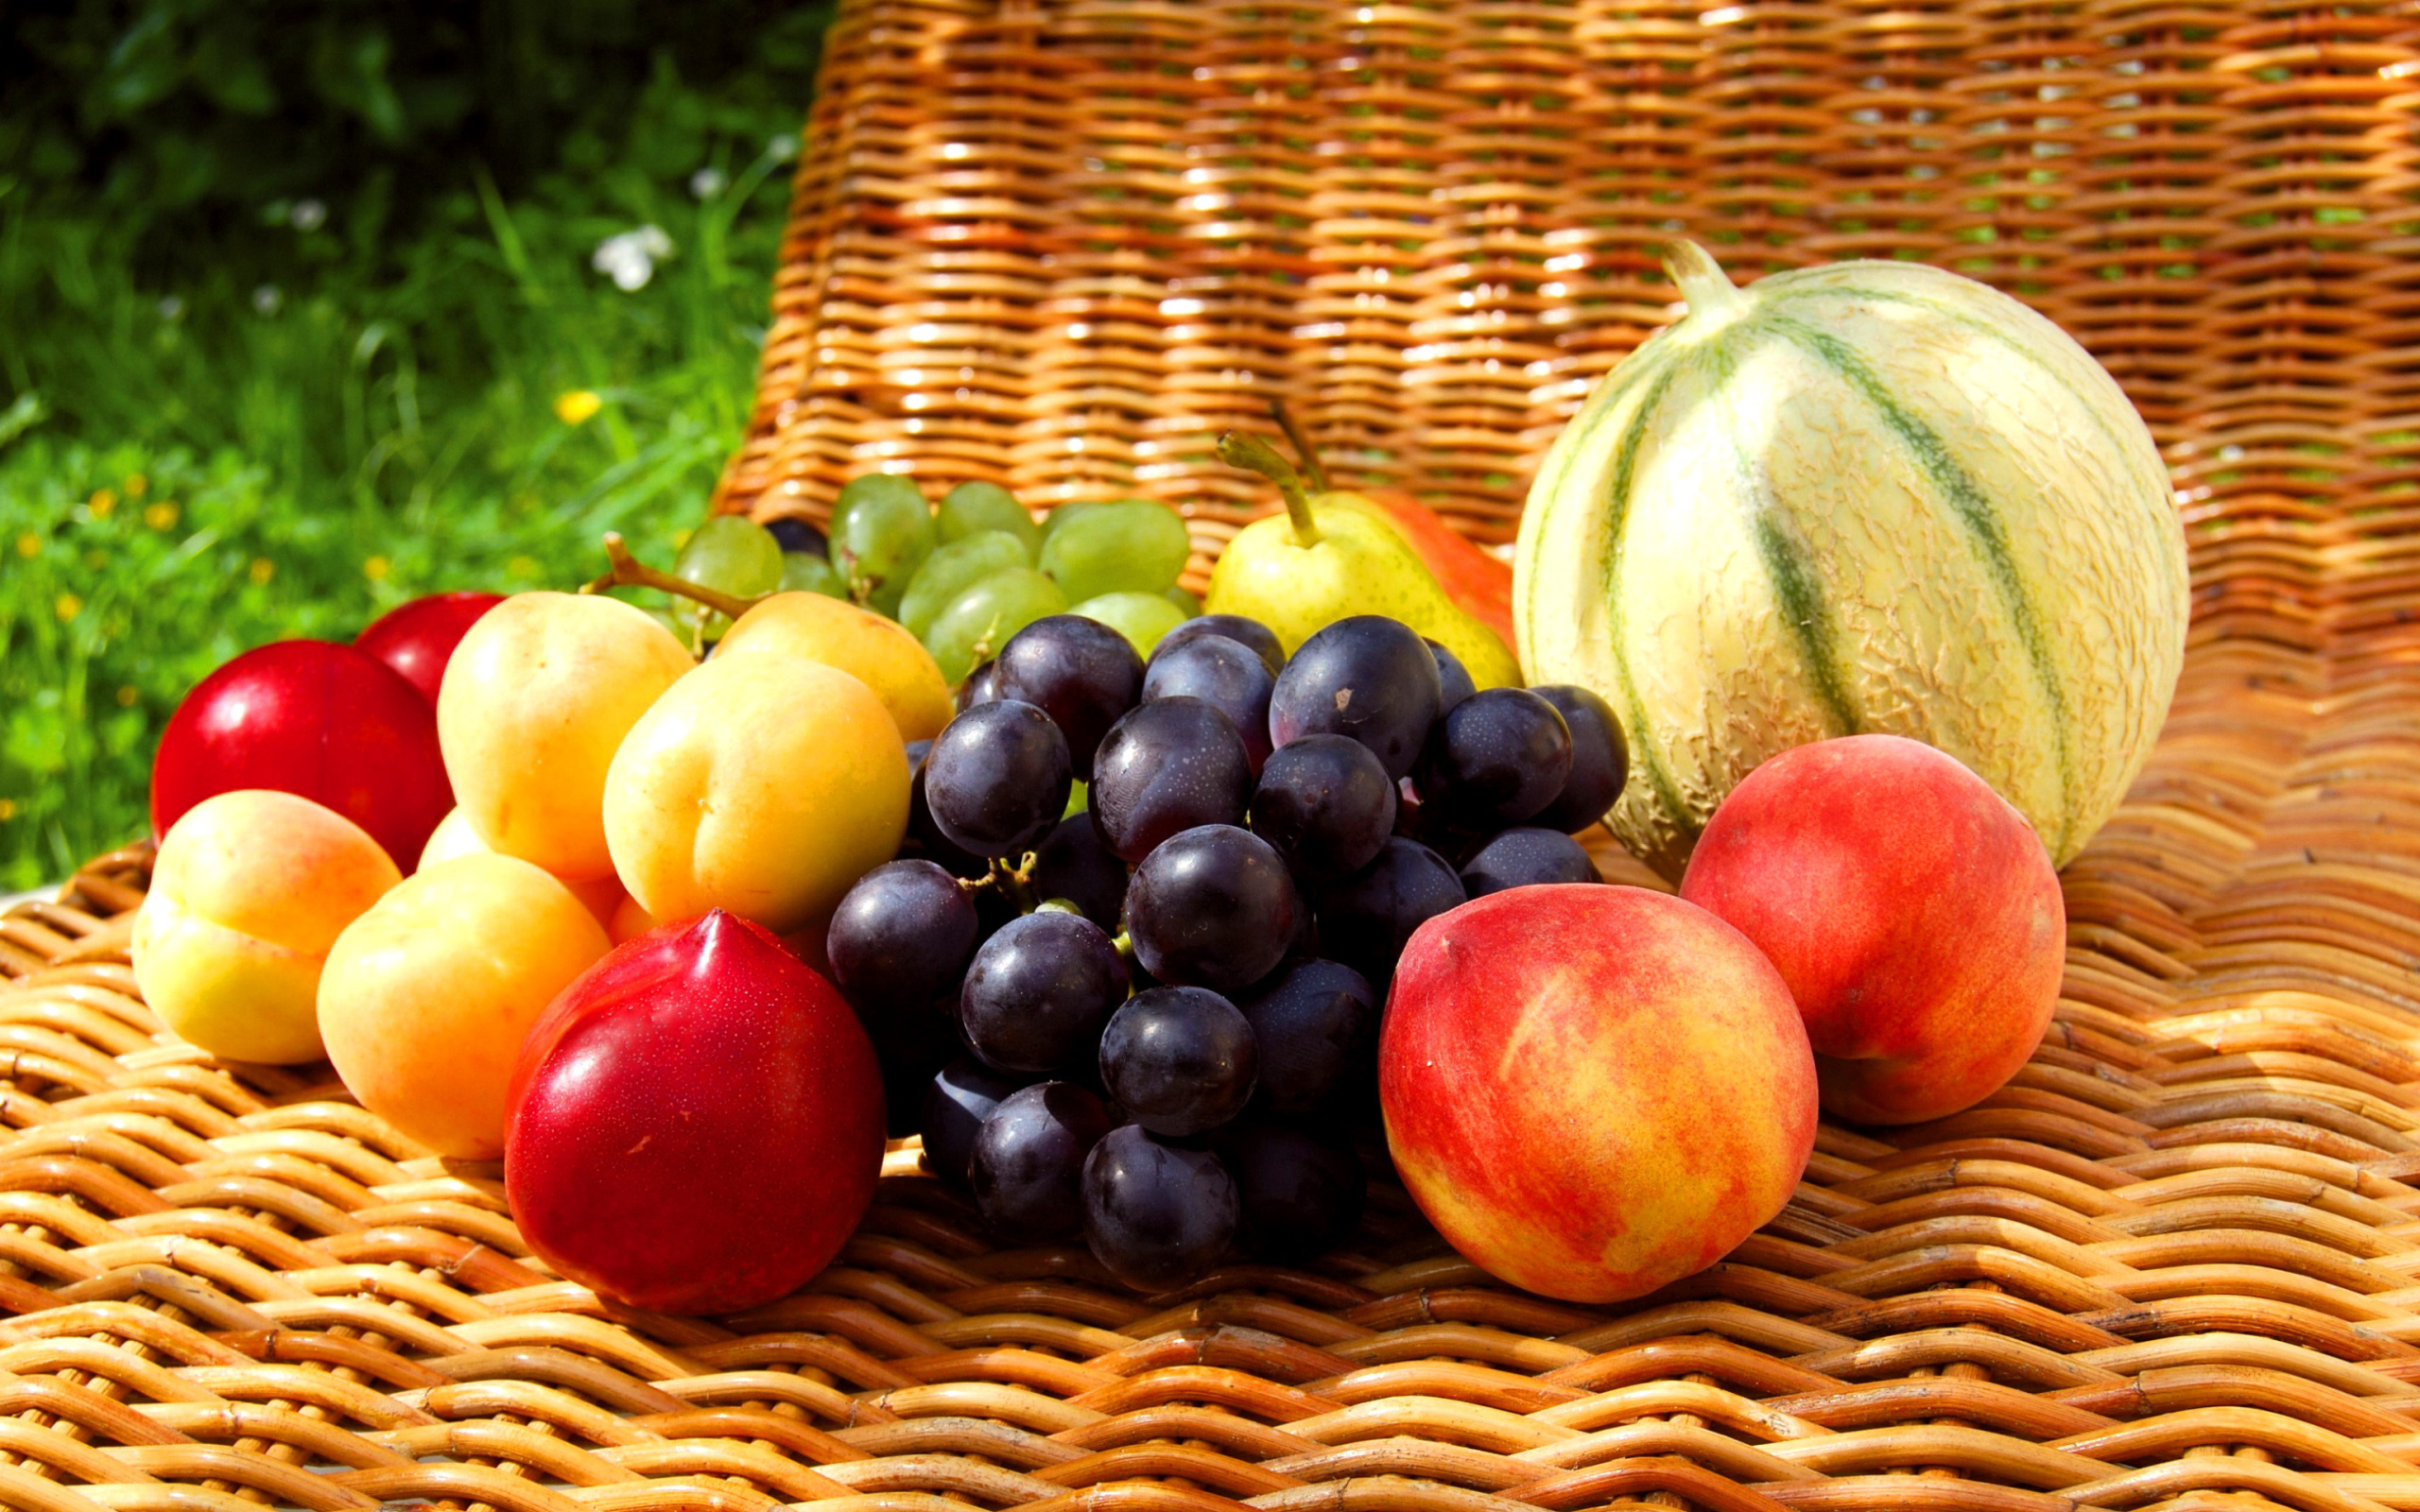 Melons, apricots, peaches, nectarines, grapes, pear screenshot #1 2560x1600